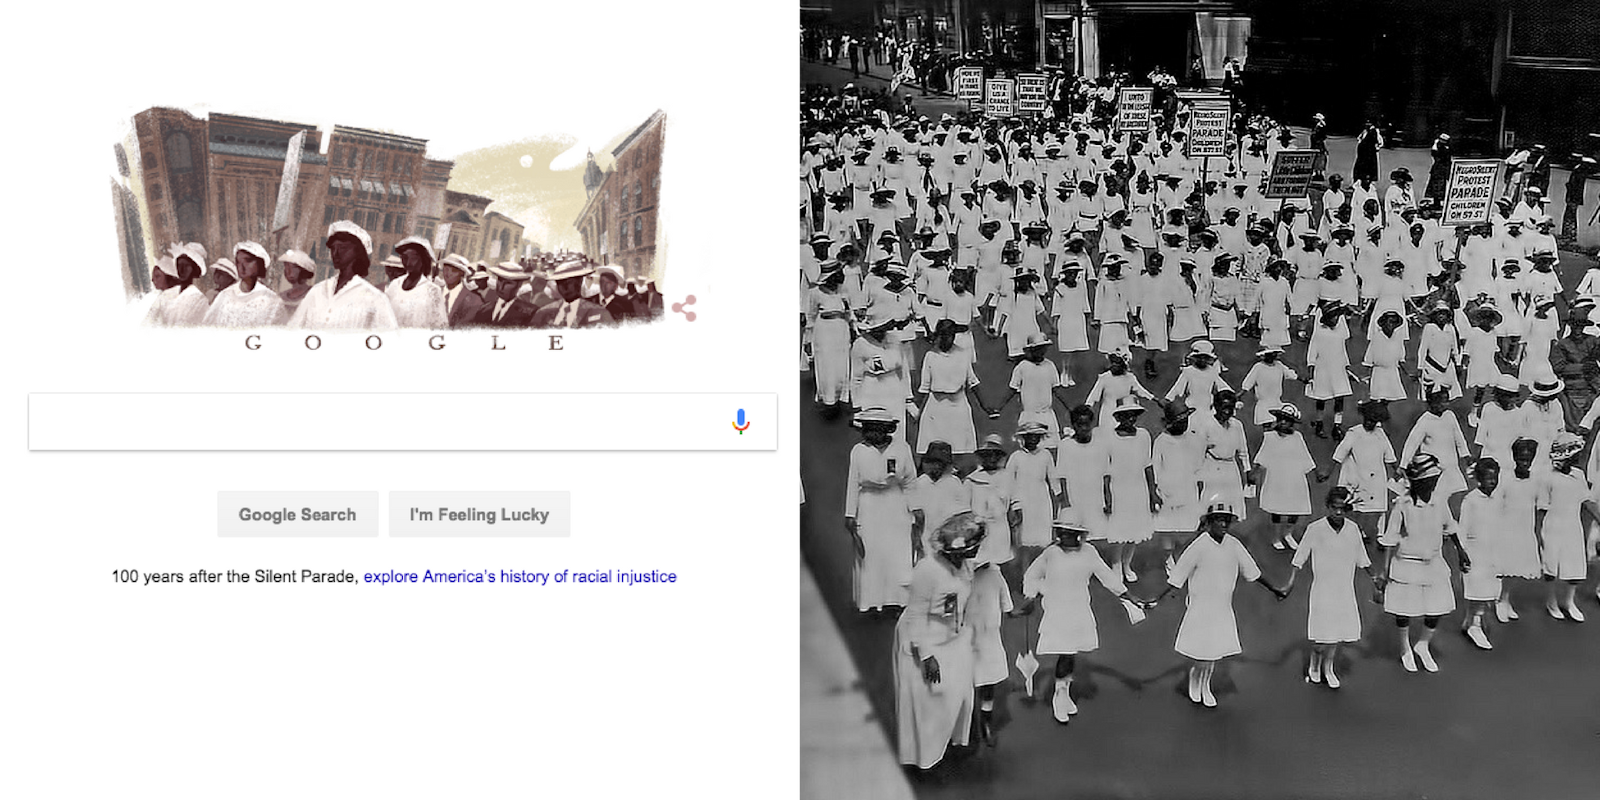 A Google Doodle of NAACP's Silent Parade protest of 1917